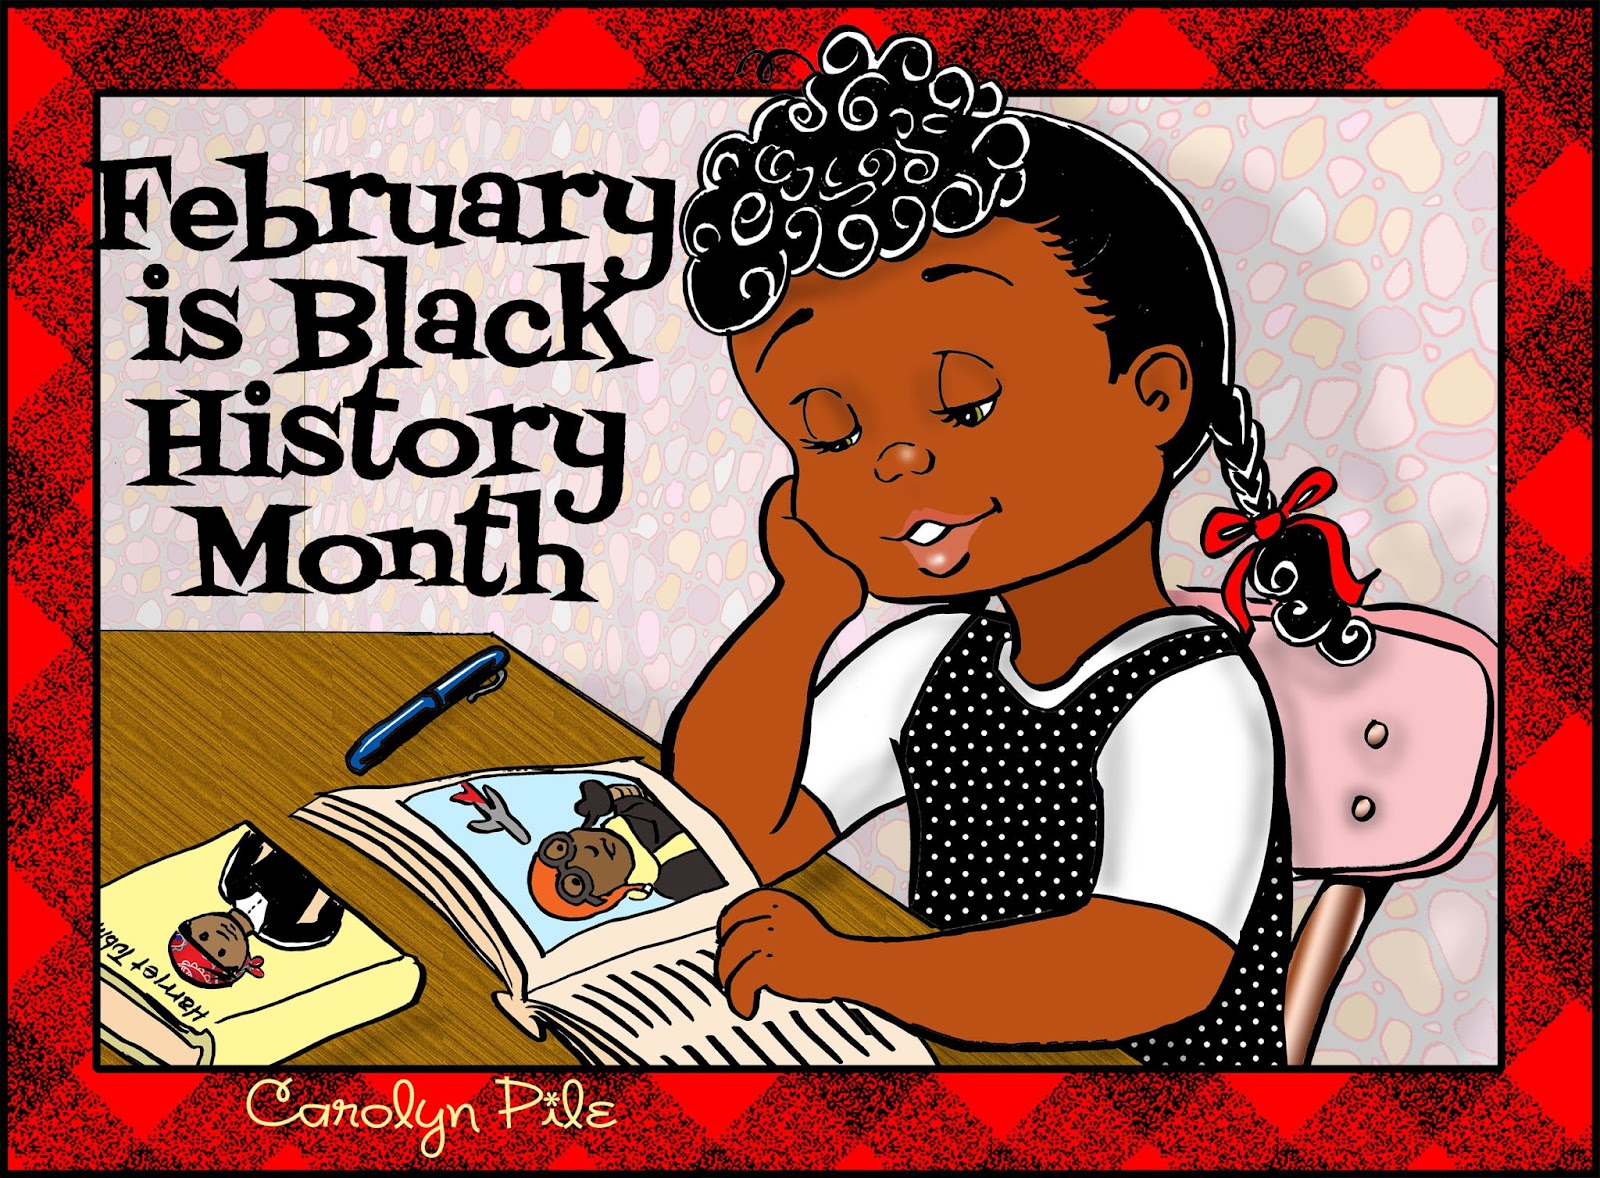 February is black history month all 'tooned up.